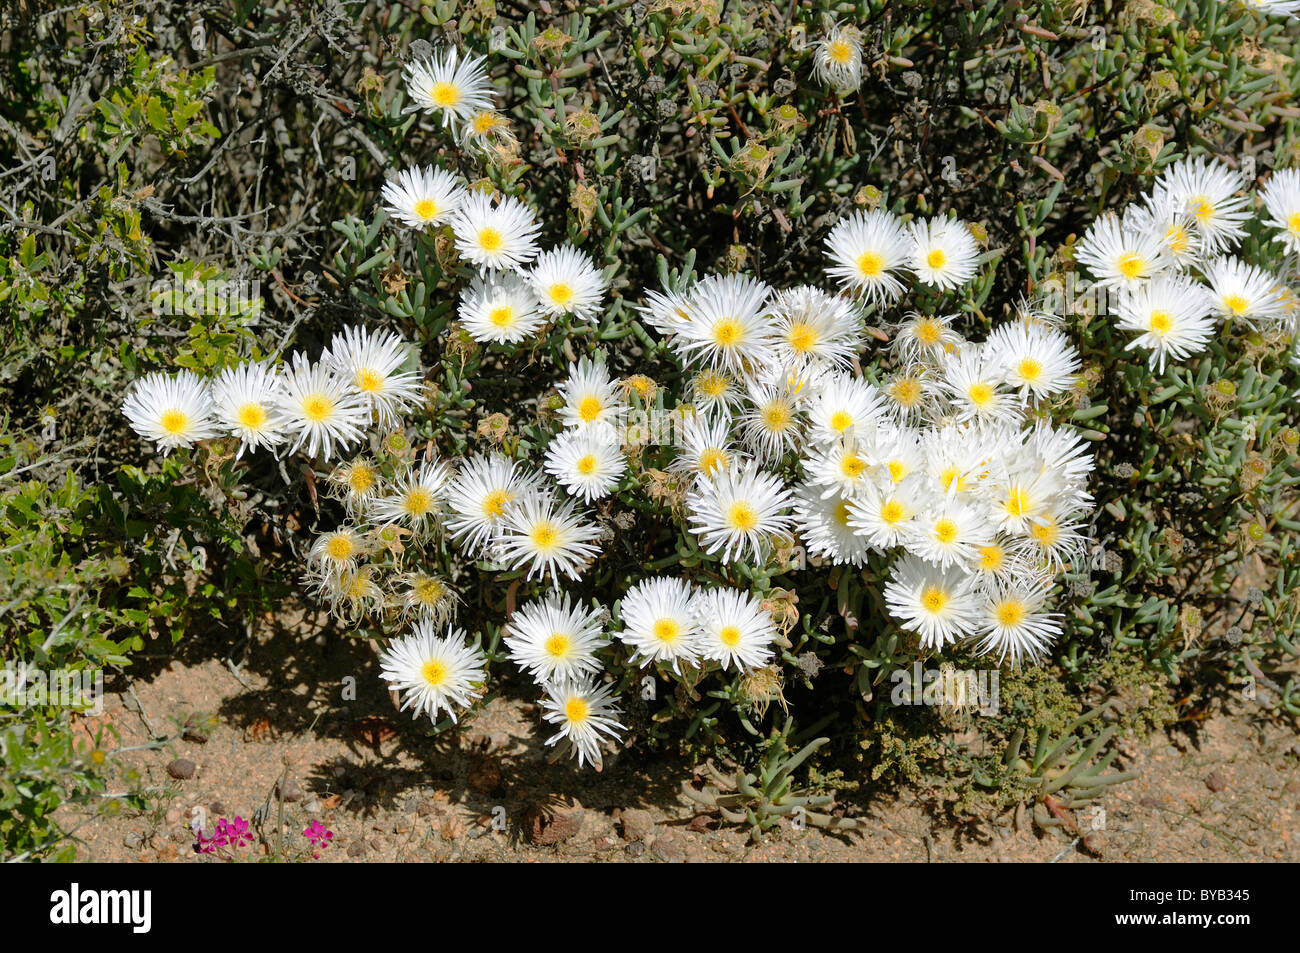 Lampranthus (Lampranthus sp.), Naries, Namaqualand, South Africa, Africa Stock Photo